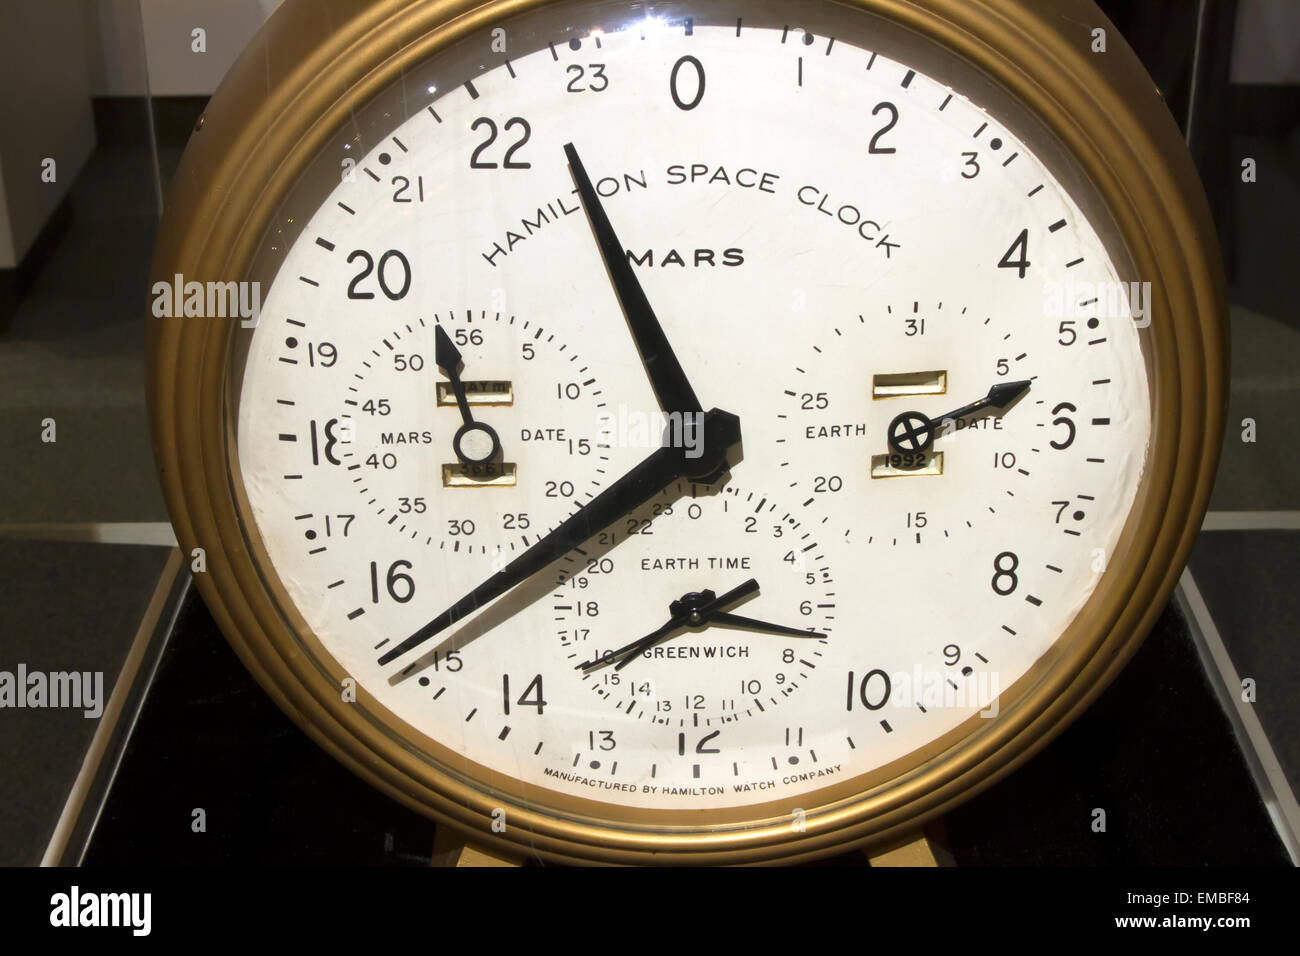 Columbia, PA, USA - April 18, 2015 : Hamilton Space Clock showing date and time on Earth and on Mars. Stock Photo